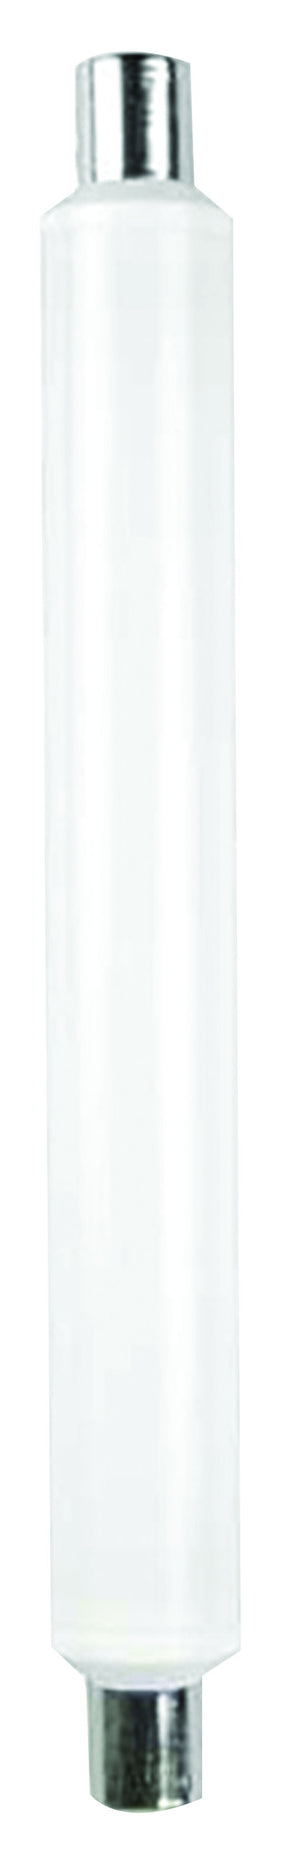 997103 - Tube Linolite LED S15 221mm 3,5W 2700K 320Lm GS TUBE The Lampco - The Lamp Company